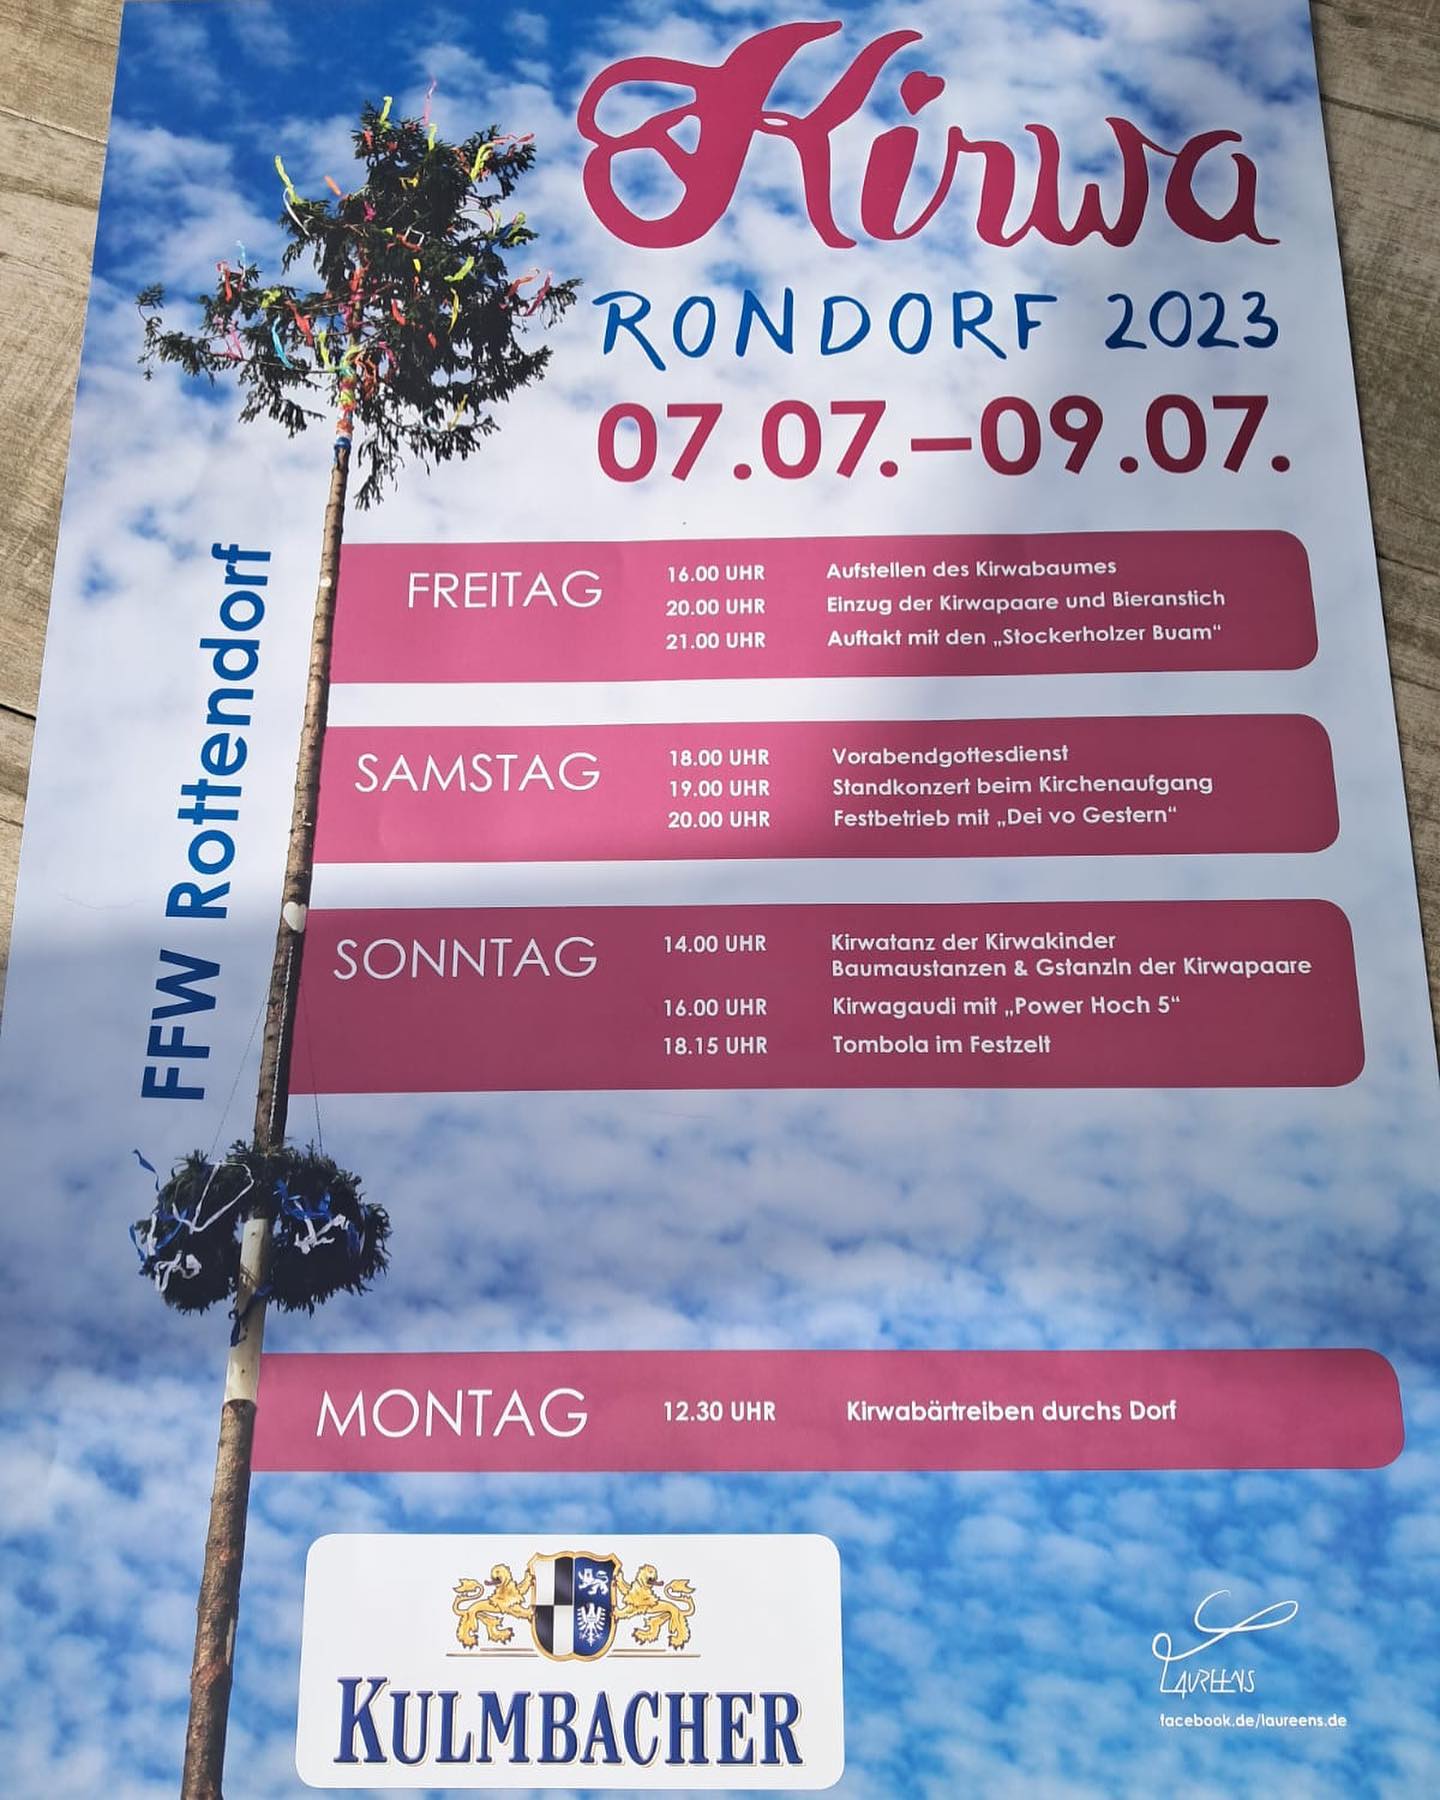 Photo shared by Kirwa Rottendorf on June 20, 2023 tagging @dei_vo_gestern, @stockerholzer_buam, @winterleitnmuse, @kljb_rottendorf, and @power_hoch_5. May be an image of poster, placemat, banner, calendar, signboard and text that says 'Kirw.jpg